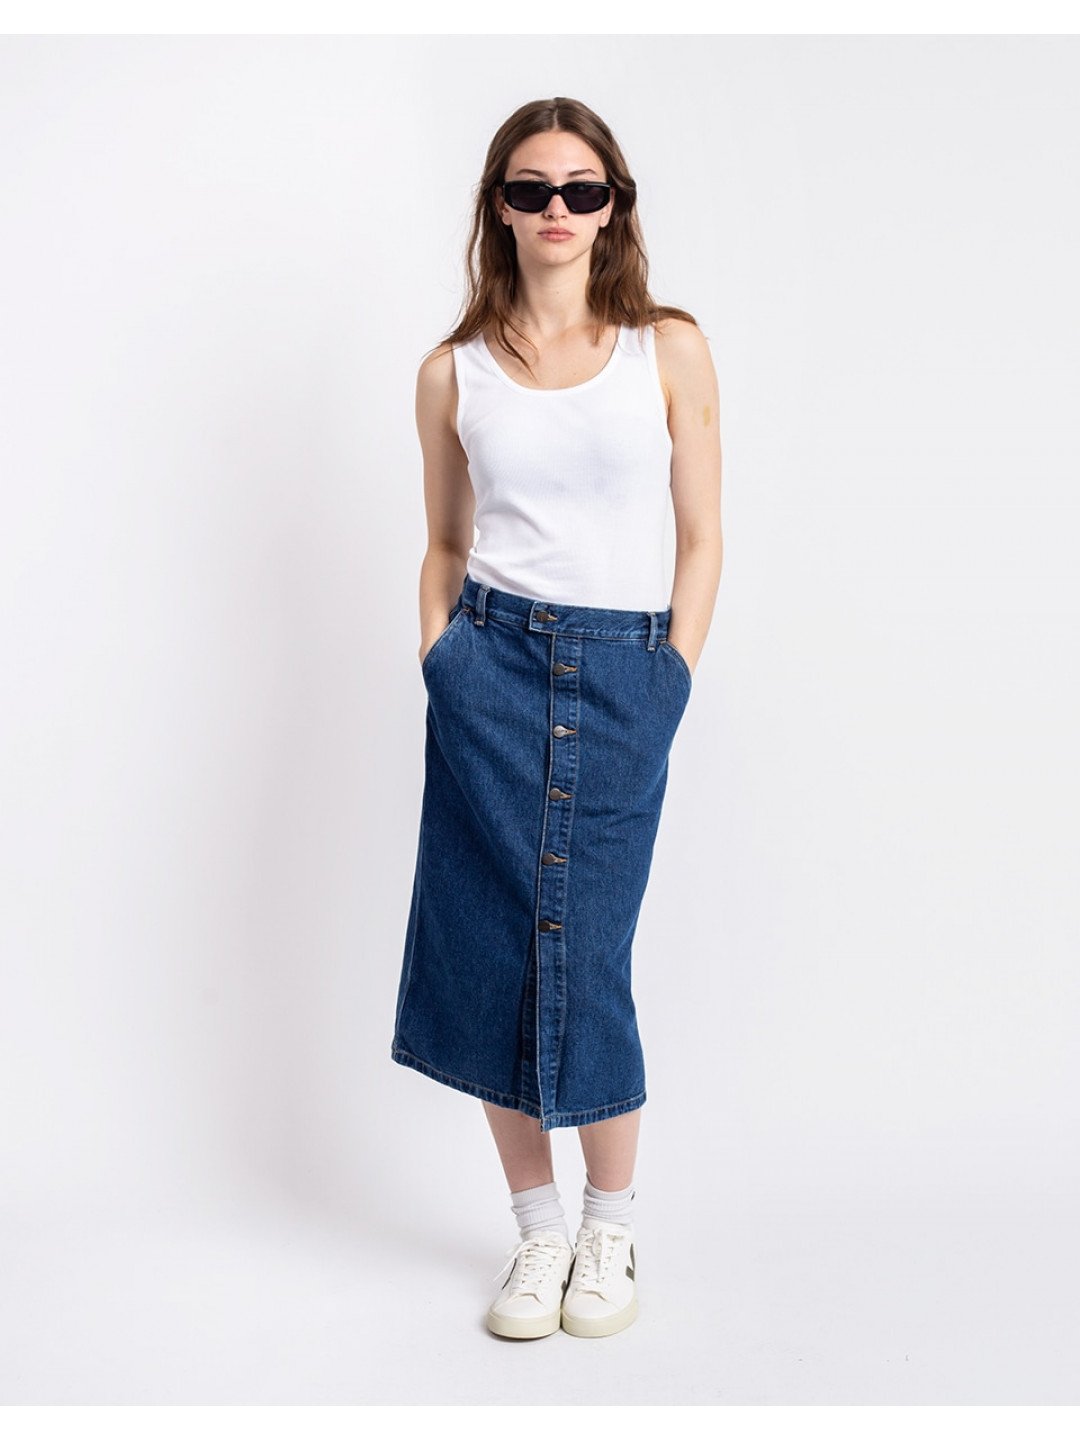 Carhartt WIP W Colby Skirt Blue stone washed L